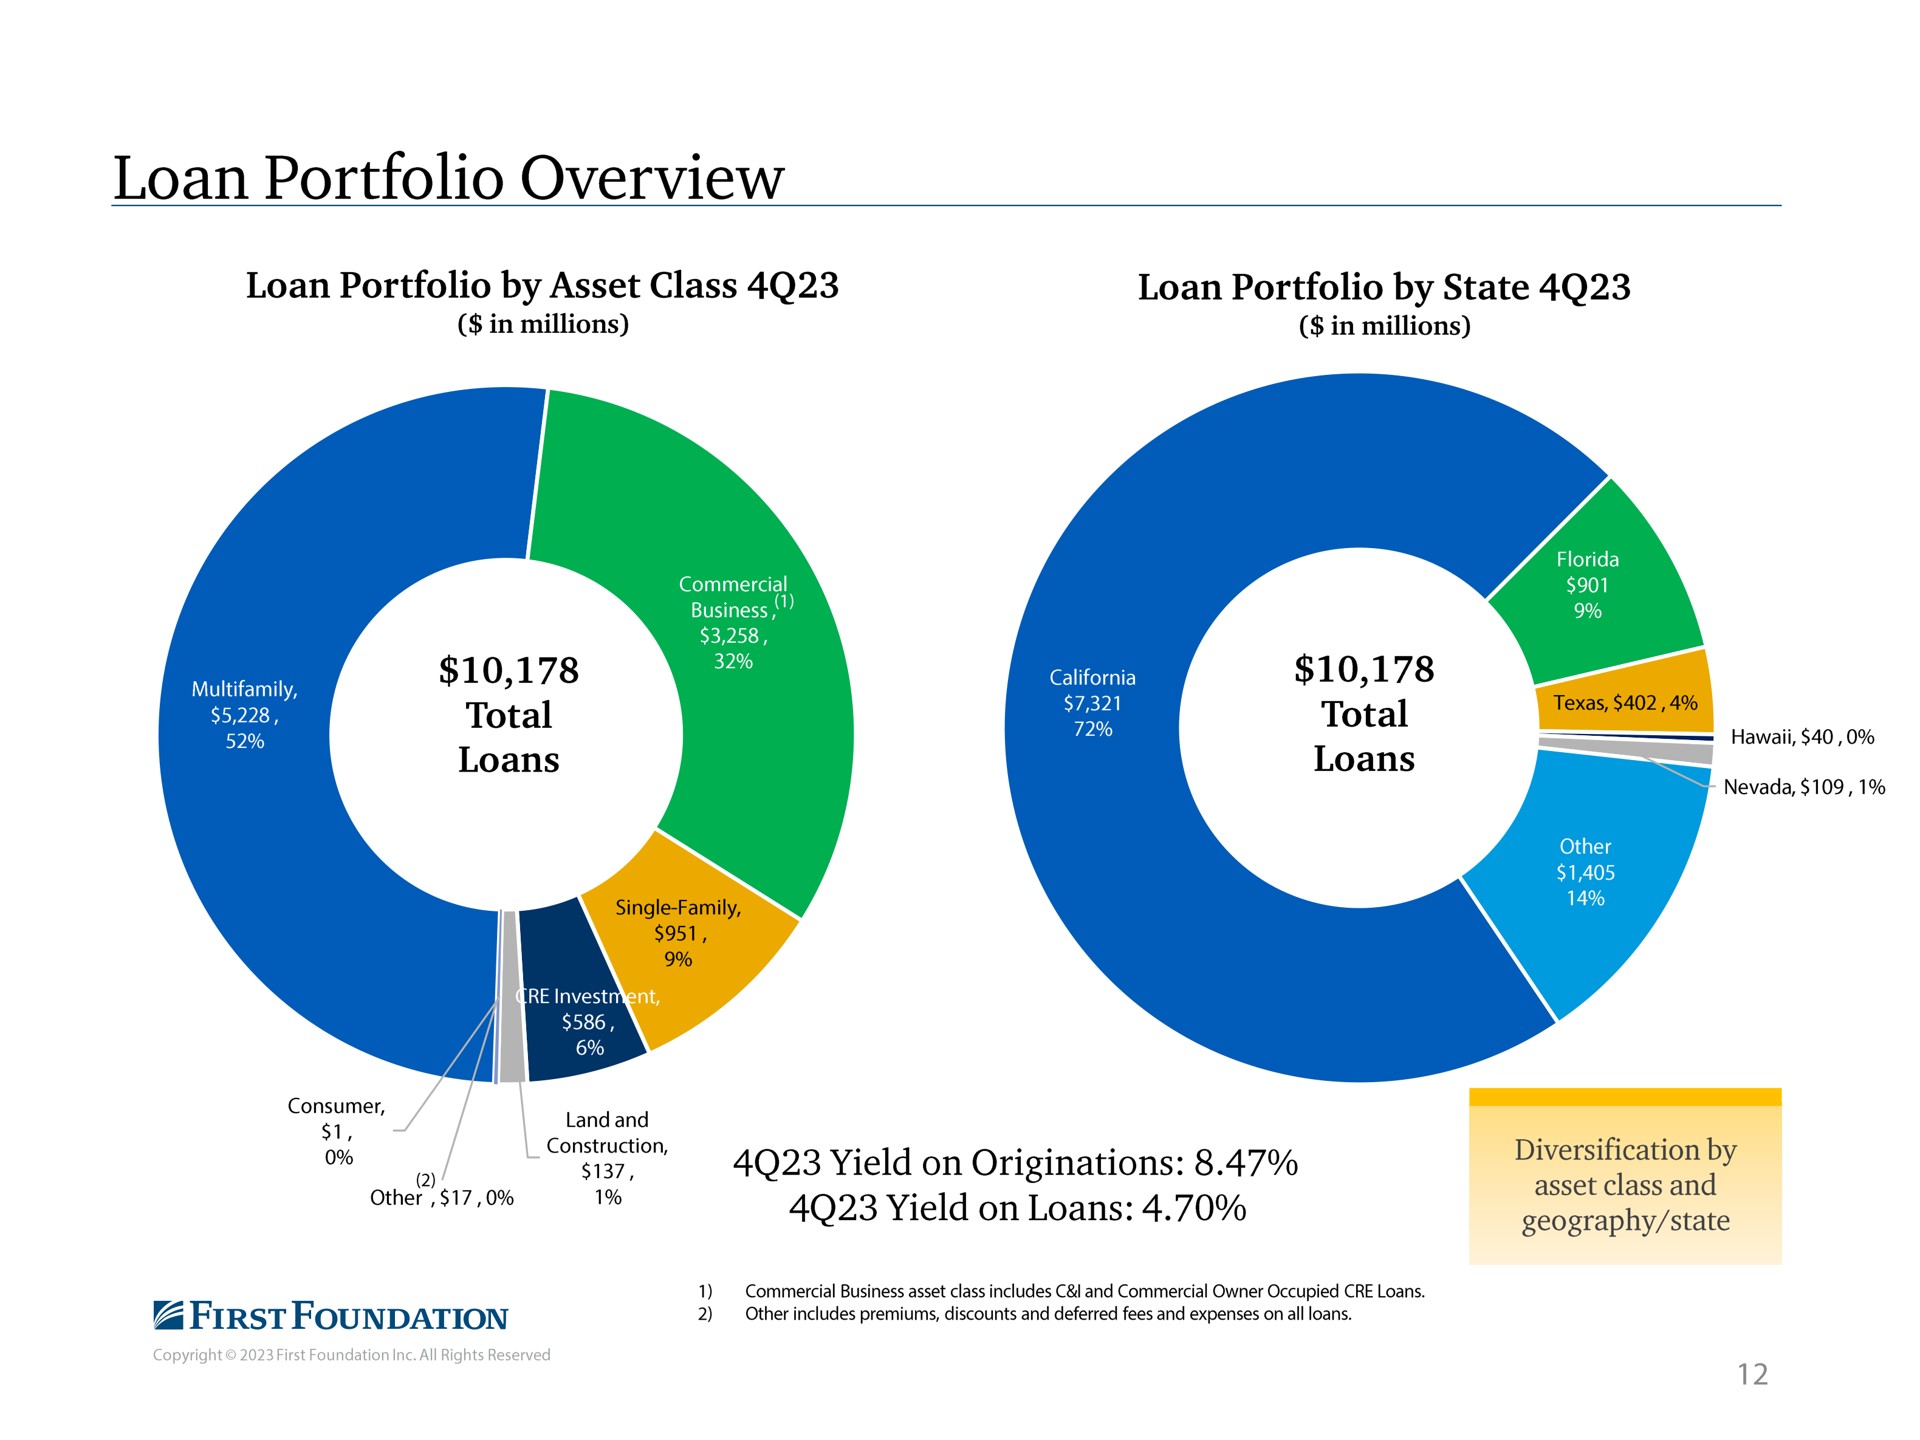 loan portfolio overview total yield on loans geography state | First Foundation